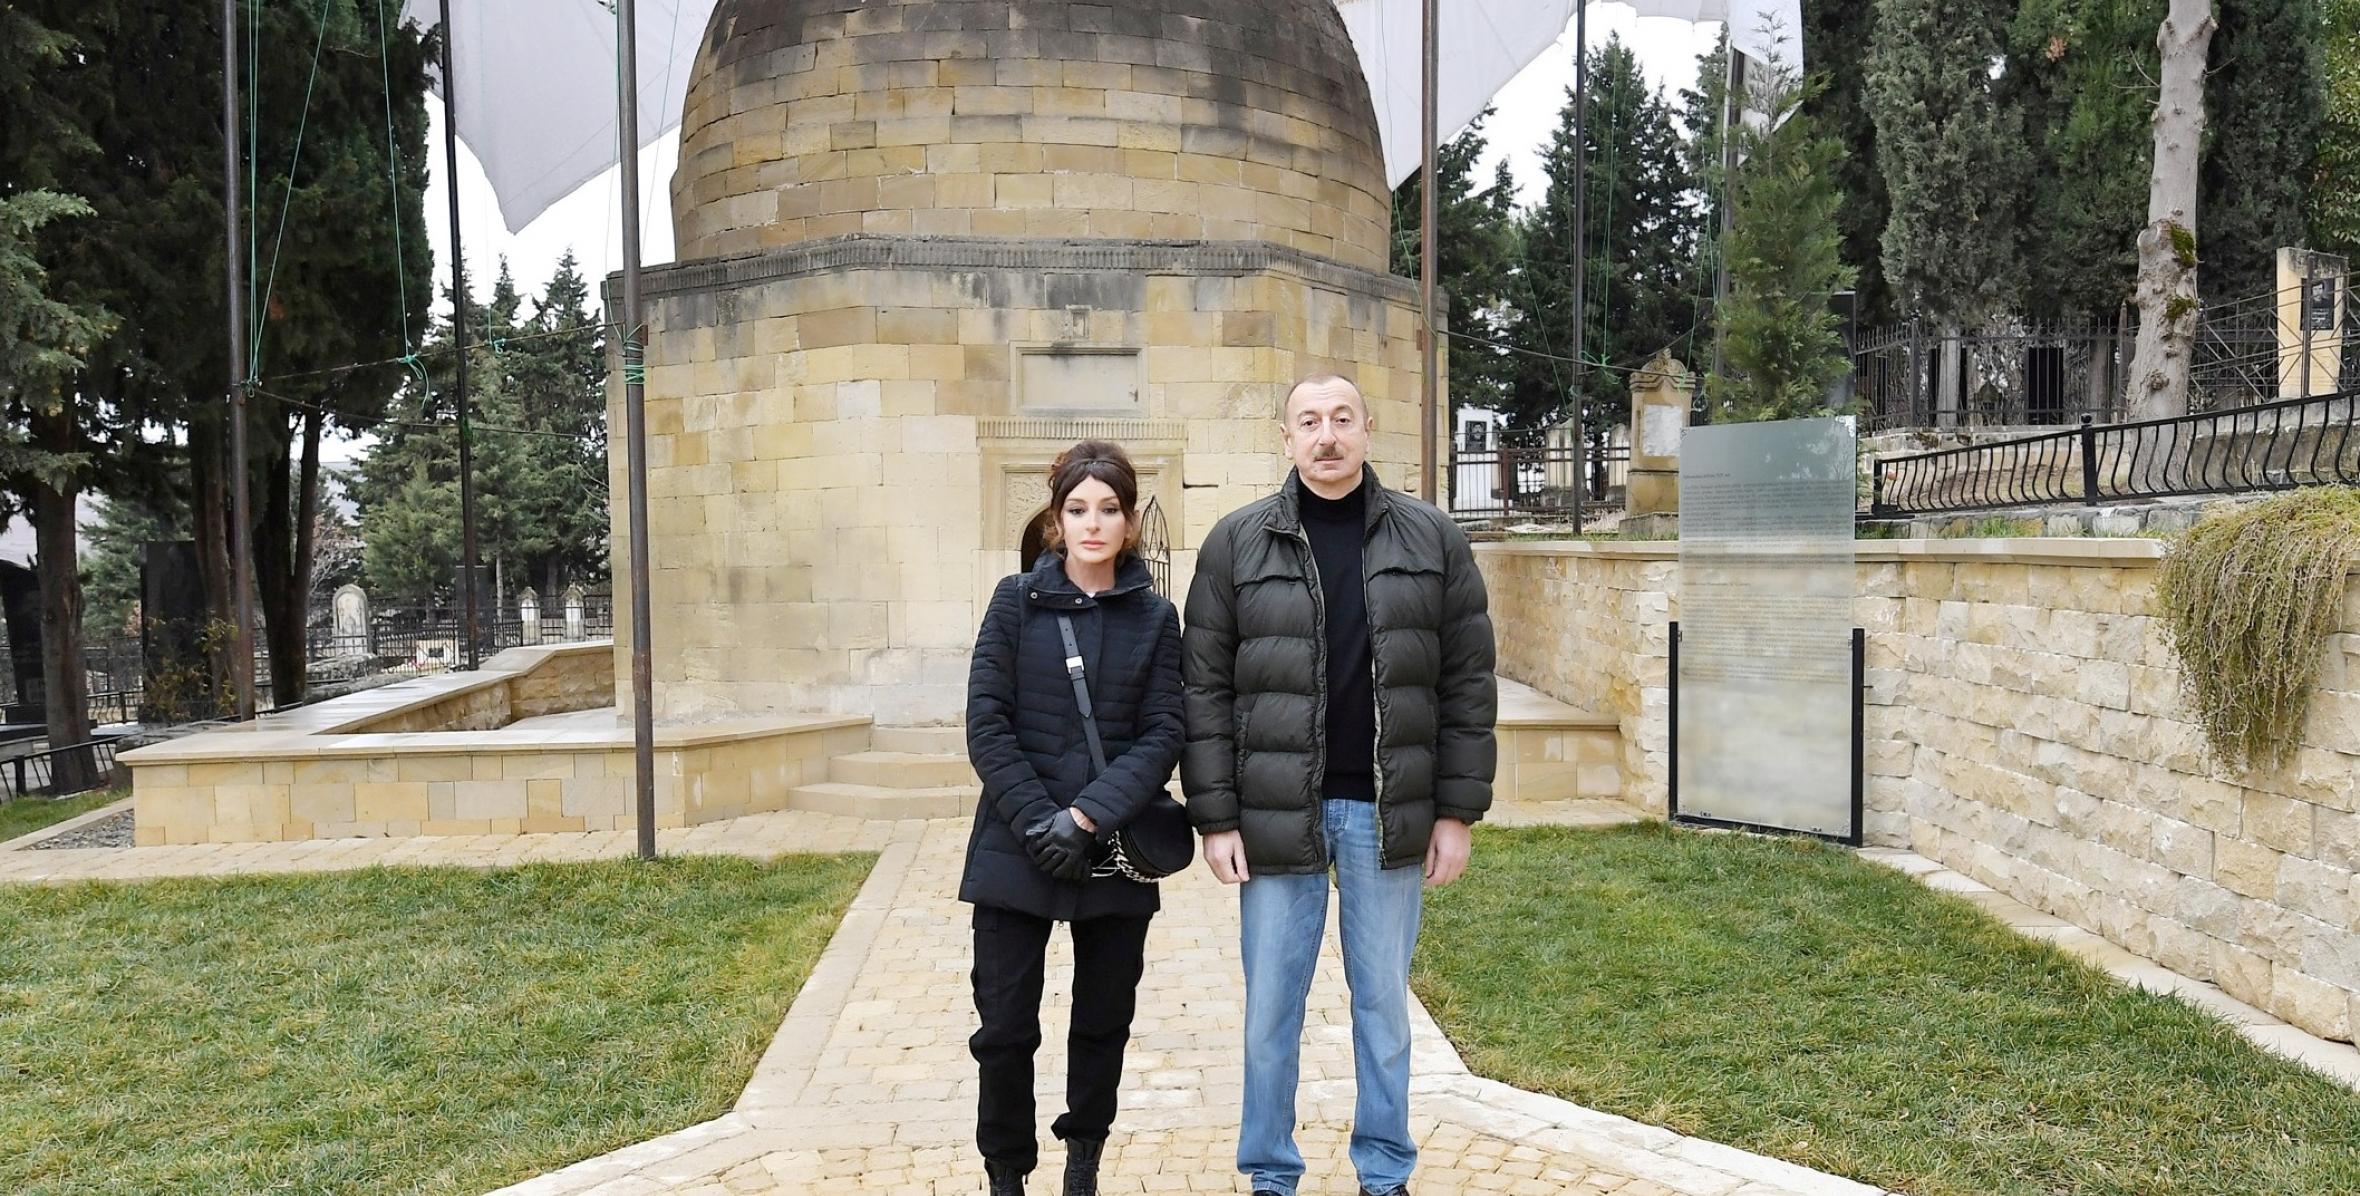 Ilham Aliyev and first lady Mehriban Aliyeva viewed landscaping work carried out around Shahkhandan tomb in Shamakhi